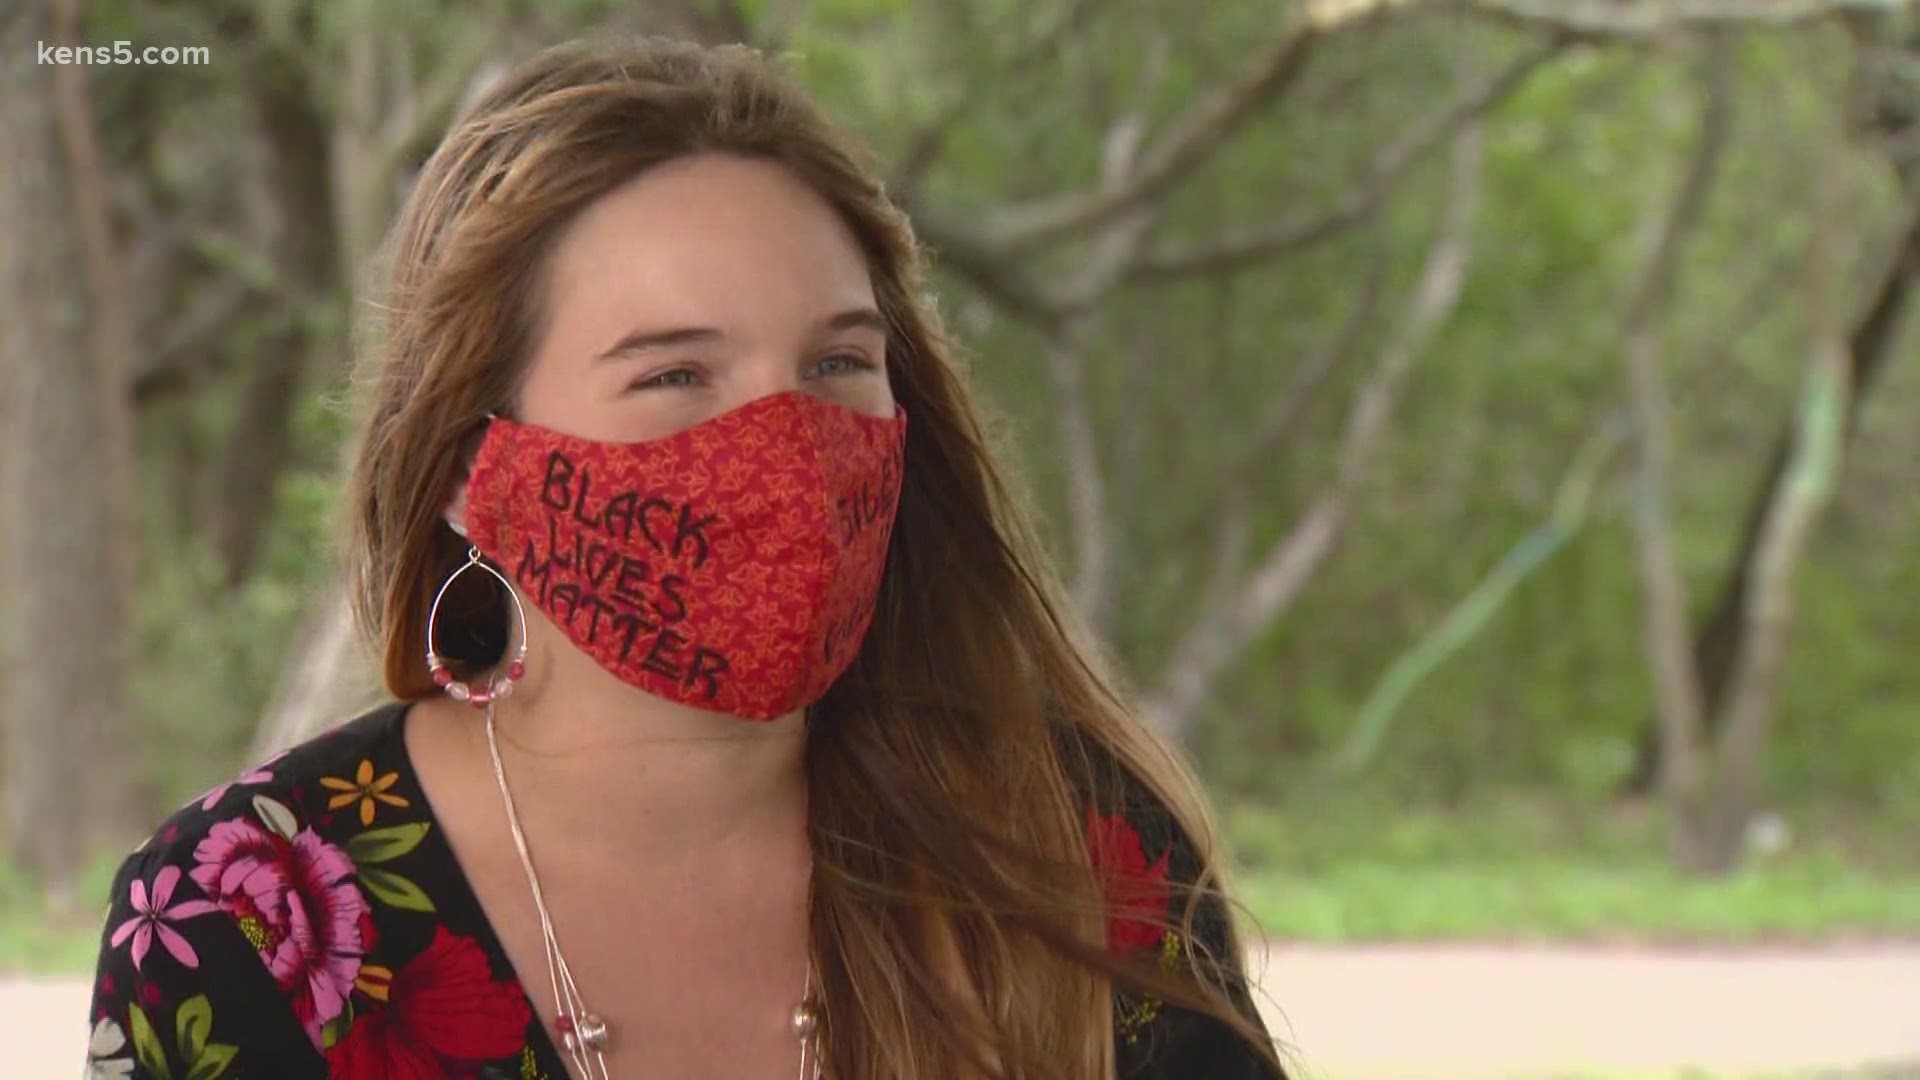 Great Hearts Texas officials emailed KENS 5 stating a face-covering policy forbids masks with "external messages."